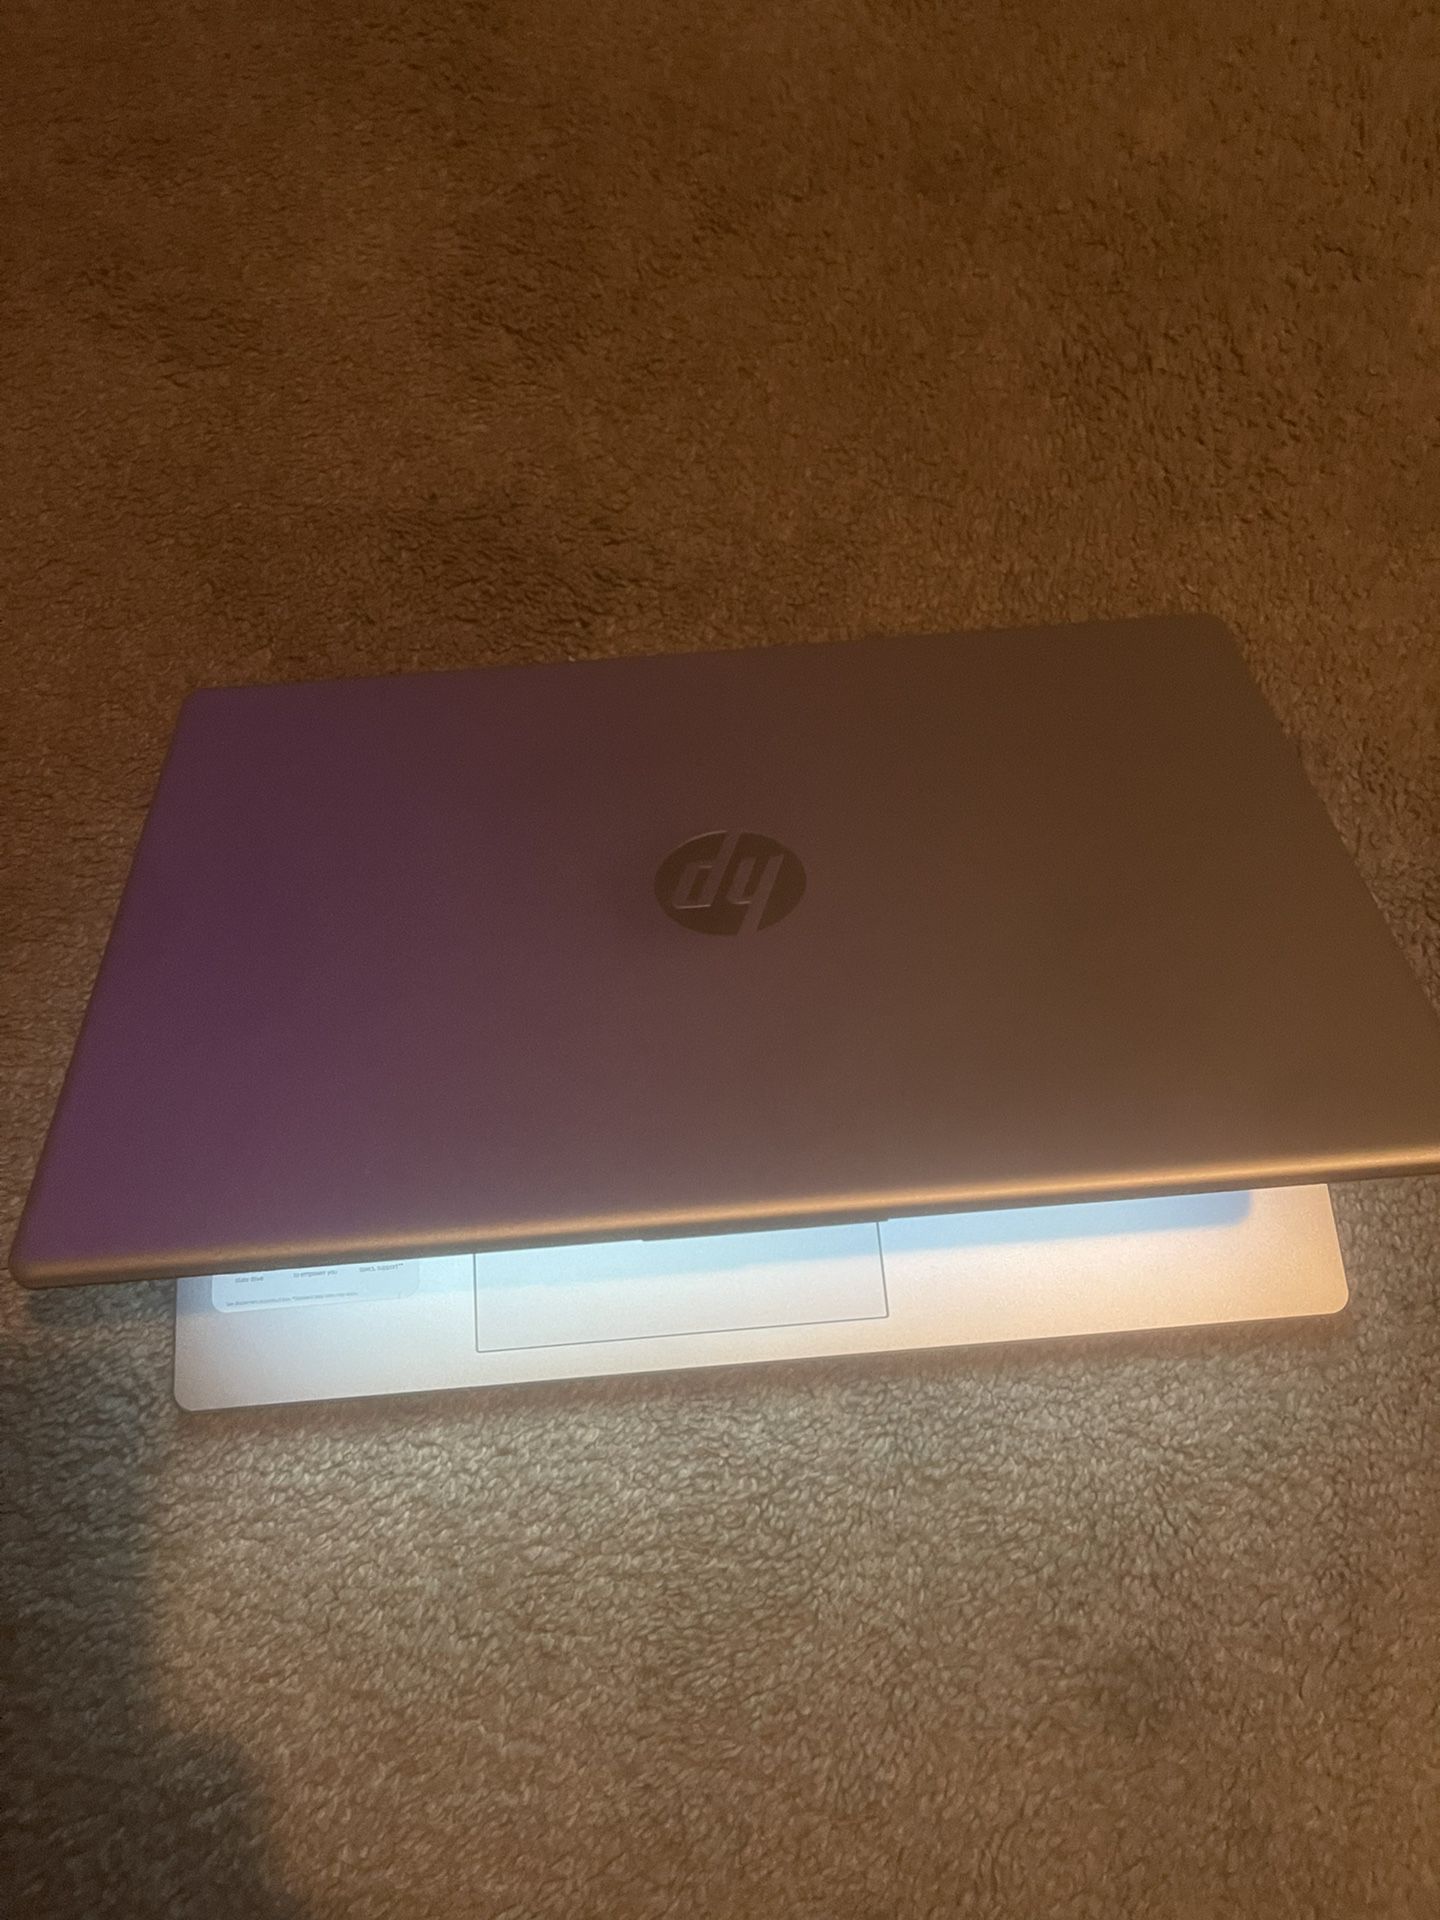 HP Touch Screen Laptop 